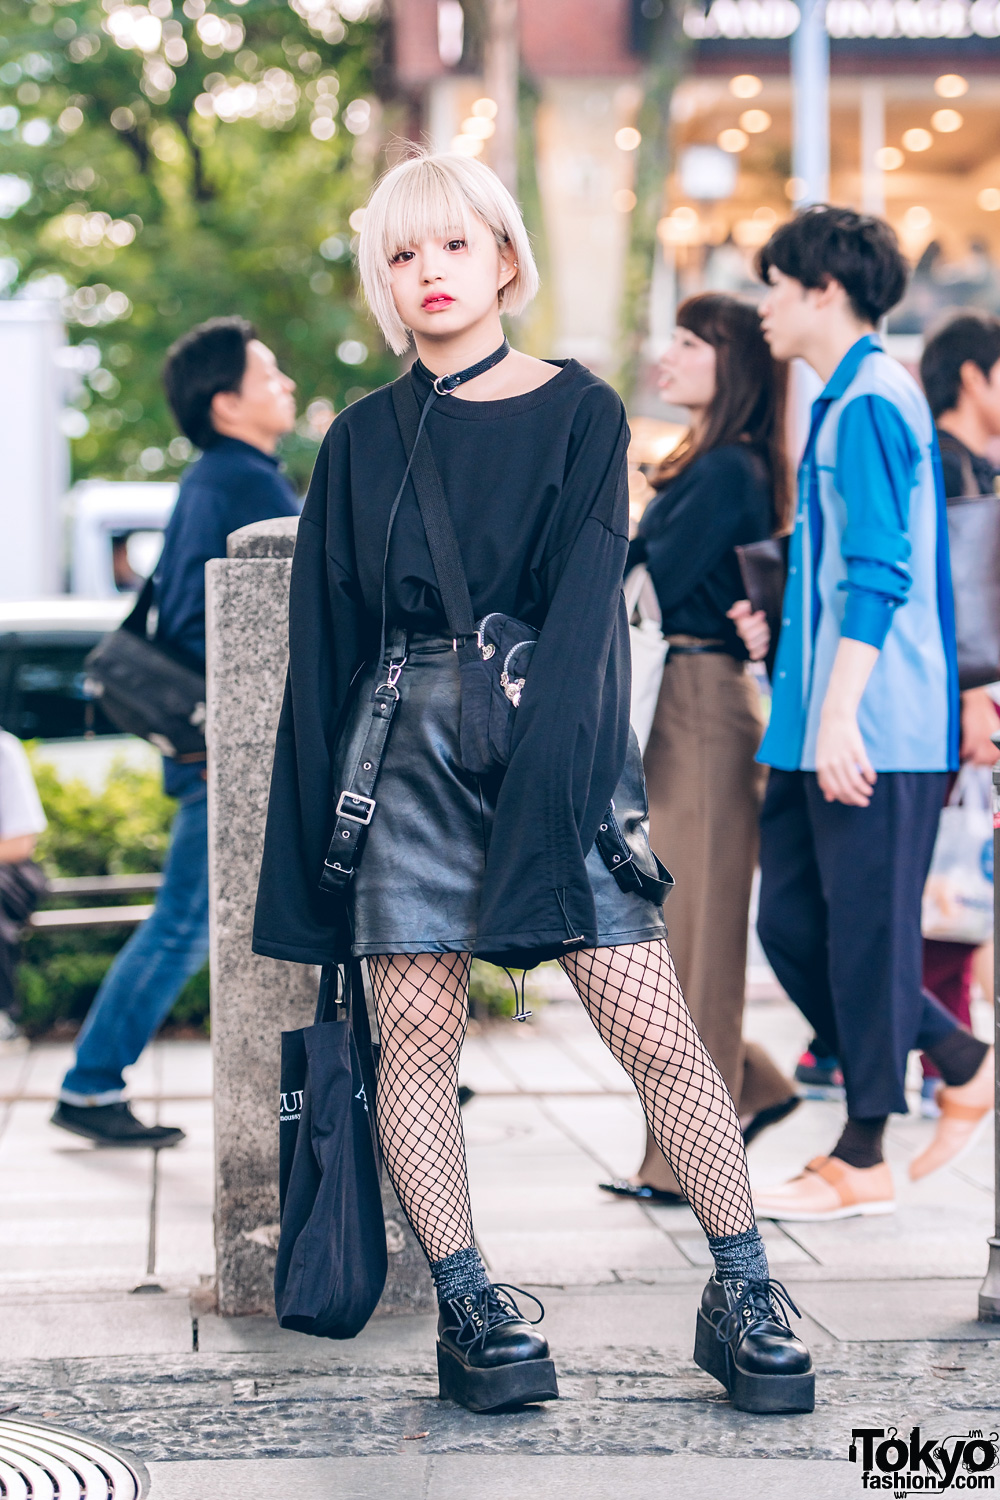 Blonde-Haired Harajuku Girl in All-Black Street Style